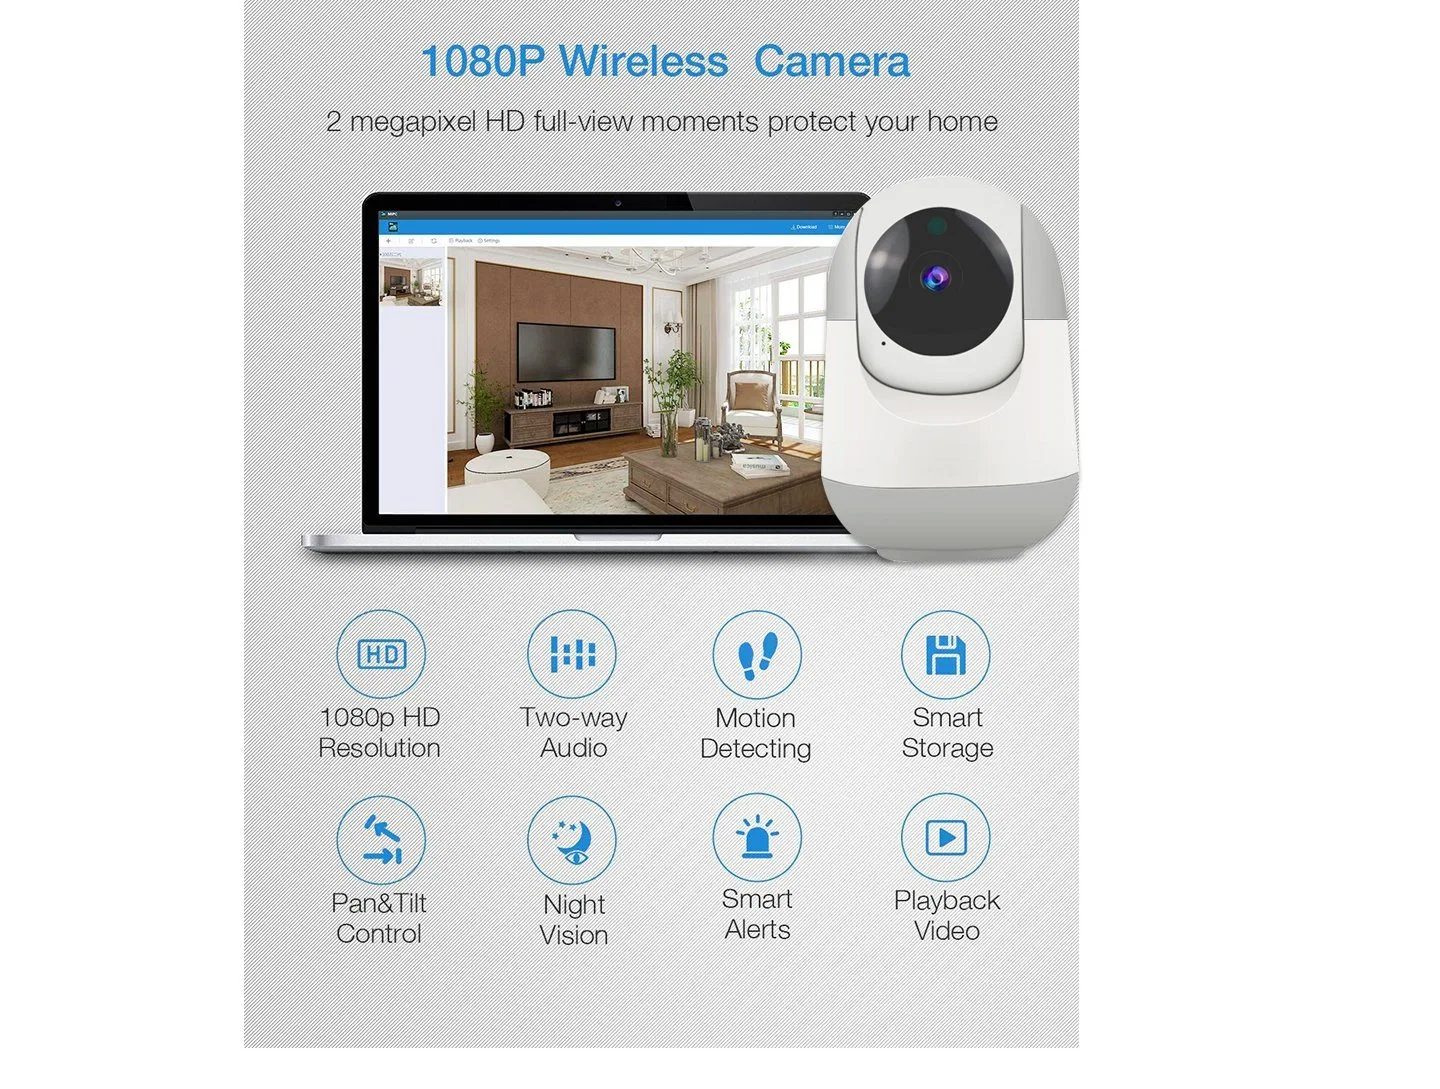 New Smart Home Wireless WiFi Security CCTV IP Camera for Consumer Electronics